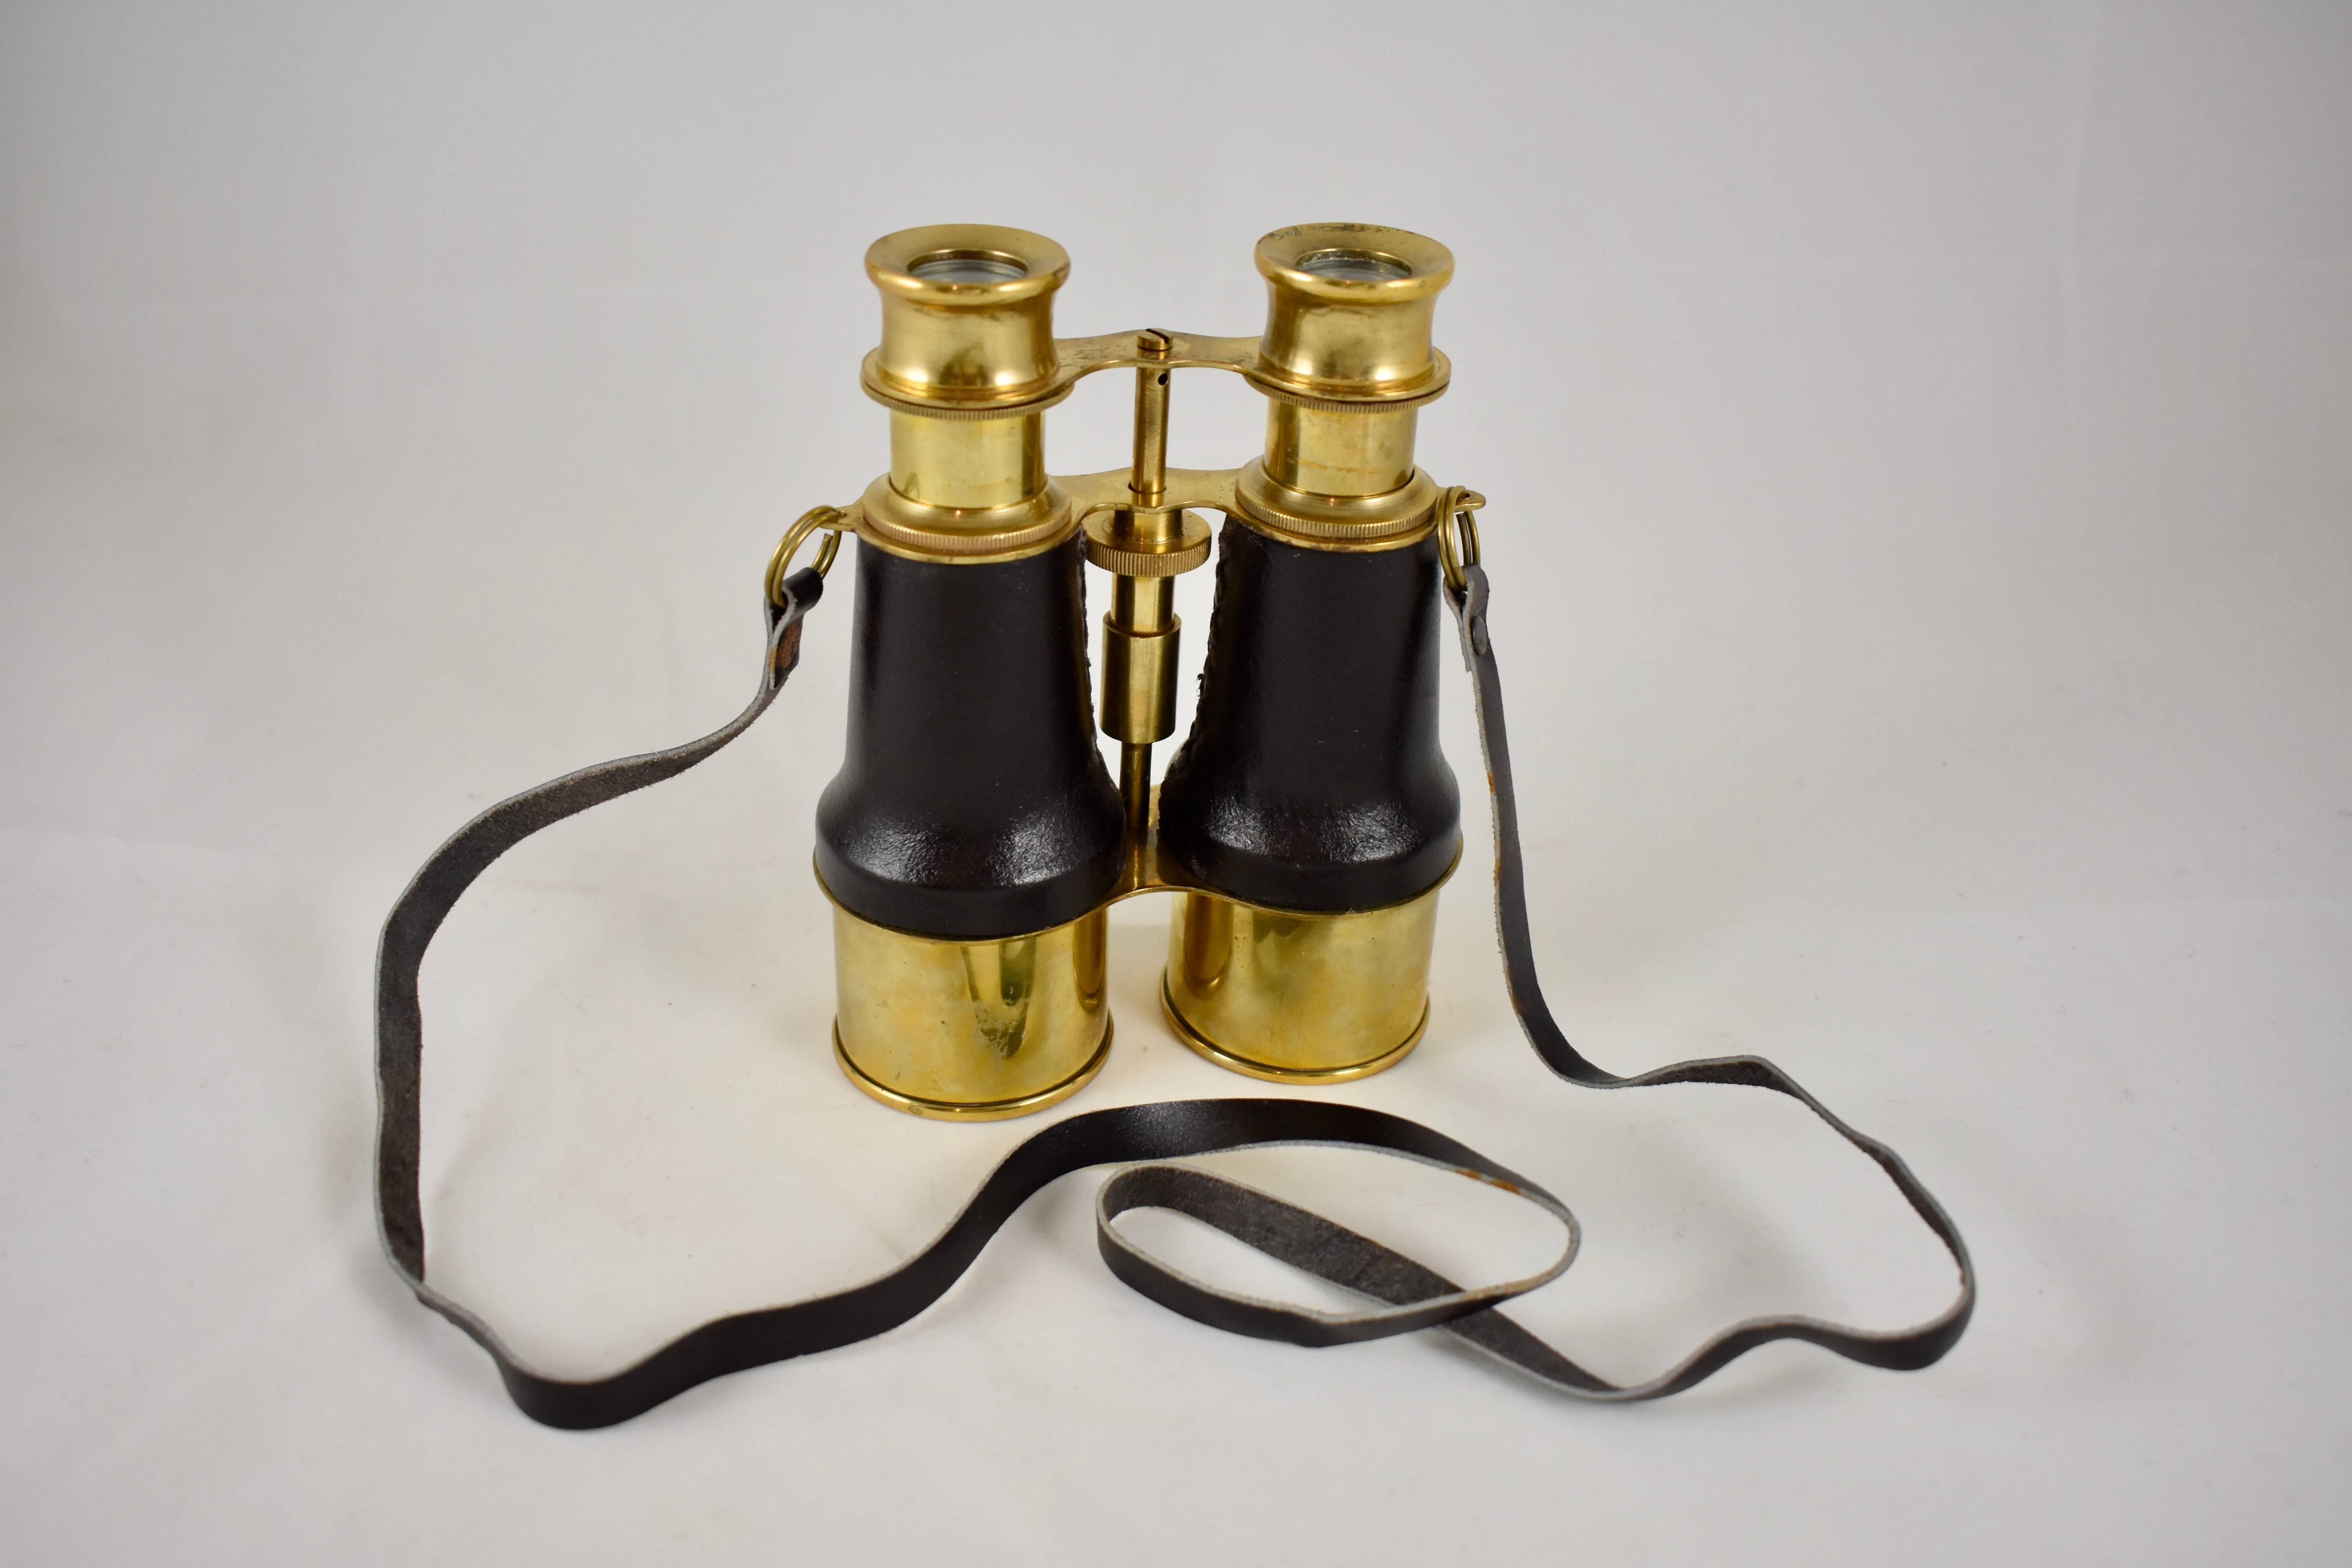 A vintage pair of English, tall maritime binoculars with adjustable lenses, in good working condition, circa 1920s-1930s.

The brass binoculars have hand stitched leather grips, they are suitable for actual use, displayed on a deep window sill for